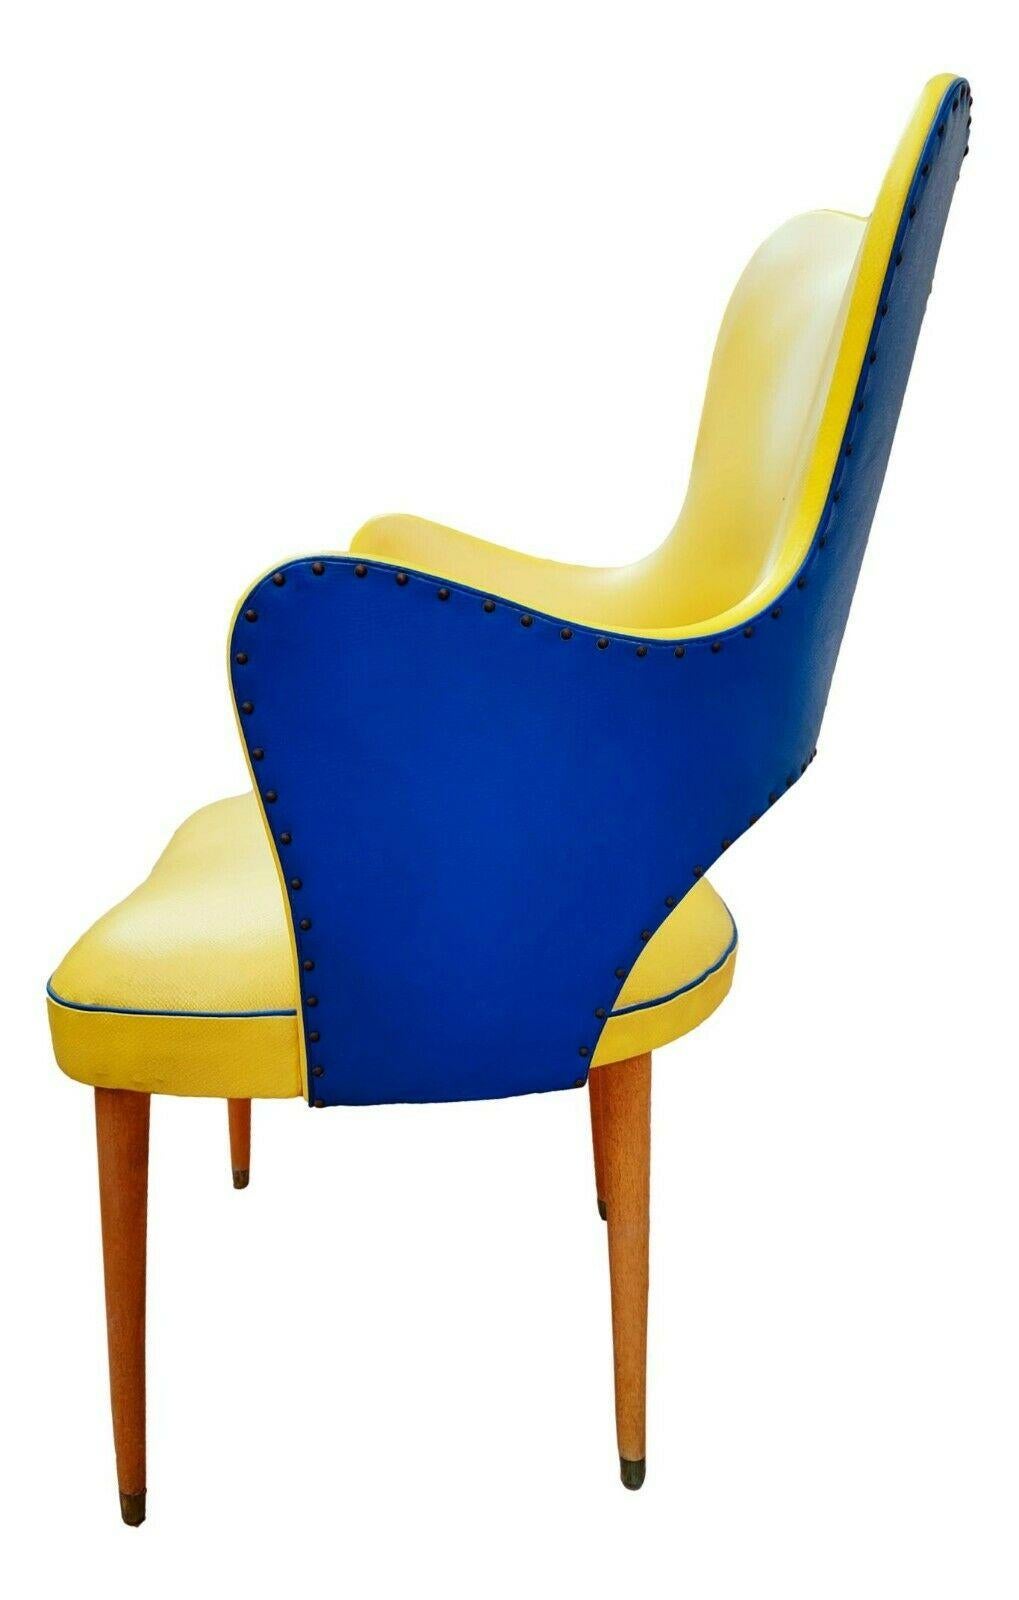 Italian Midcentury Two-Tone Armchair in Eco-Leather Attributed to Gastone Rinaldi, 1950 For Sale